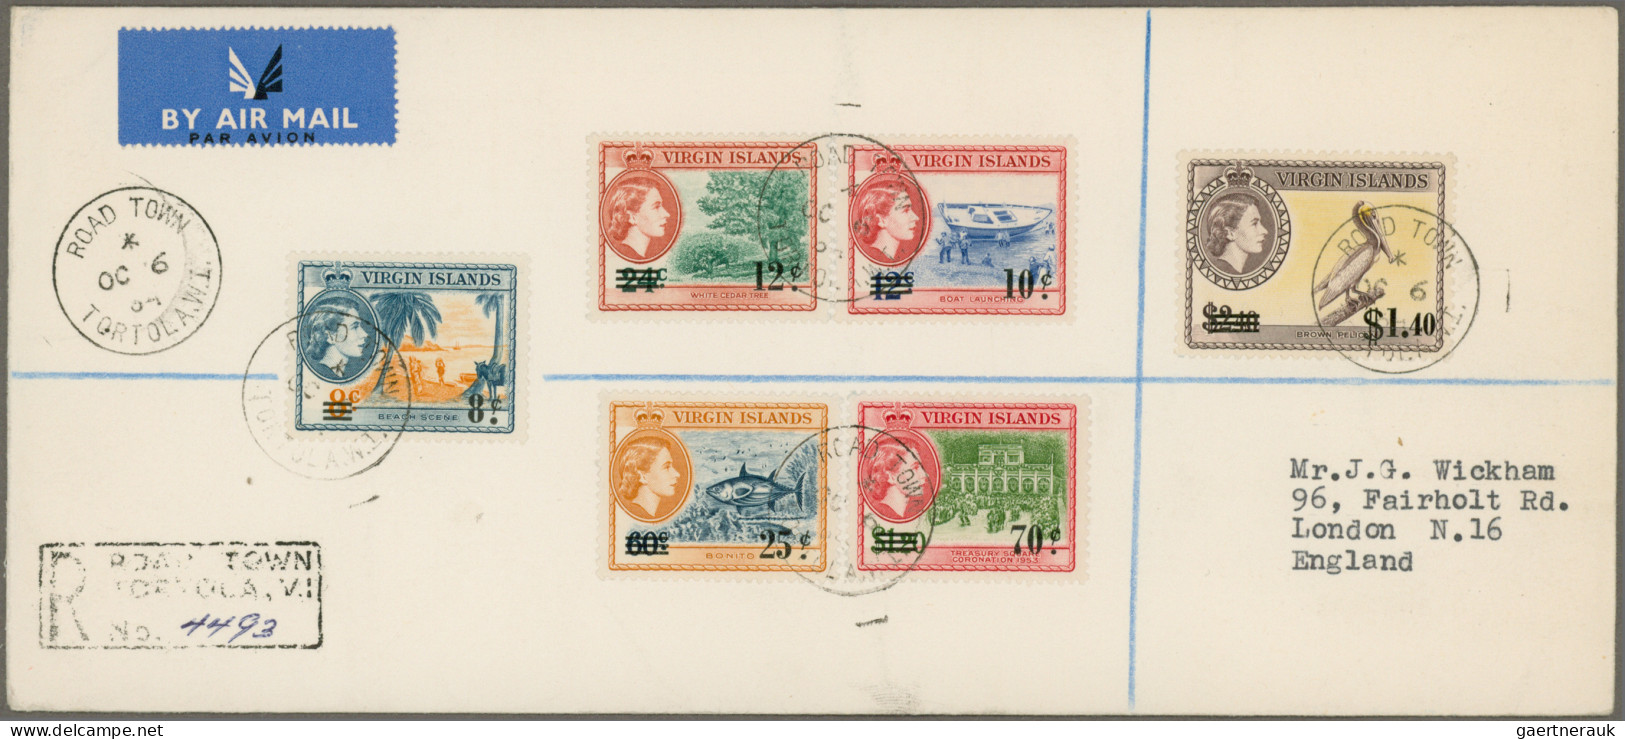 Virgin Islands: 1962/1964, Definitives "Pictorials" In US Currency, Two Sets On - Iles Vièrges Britanniques